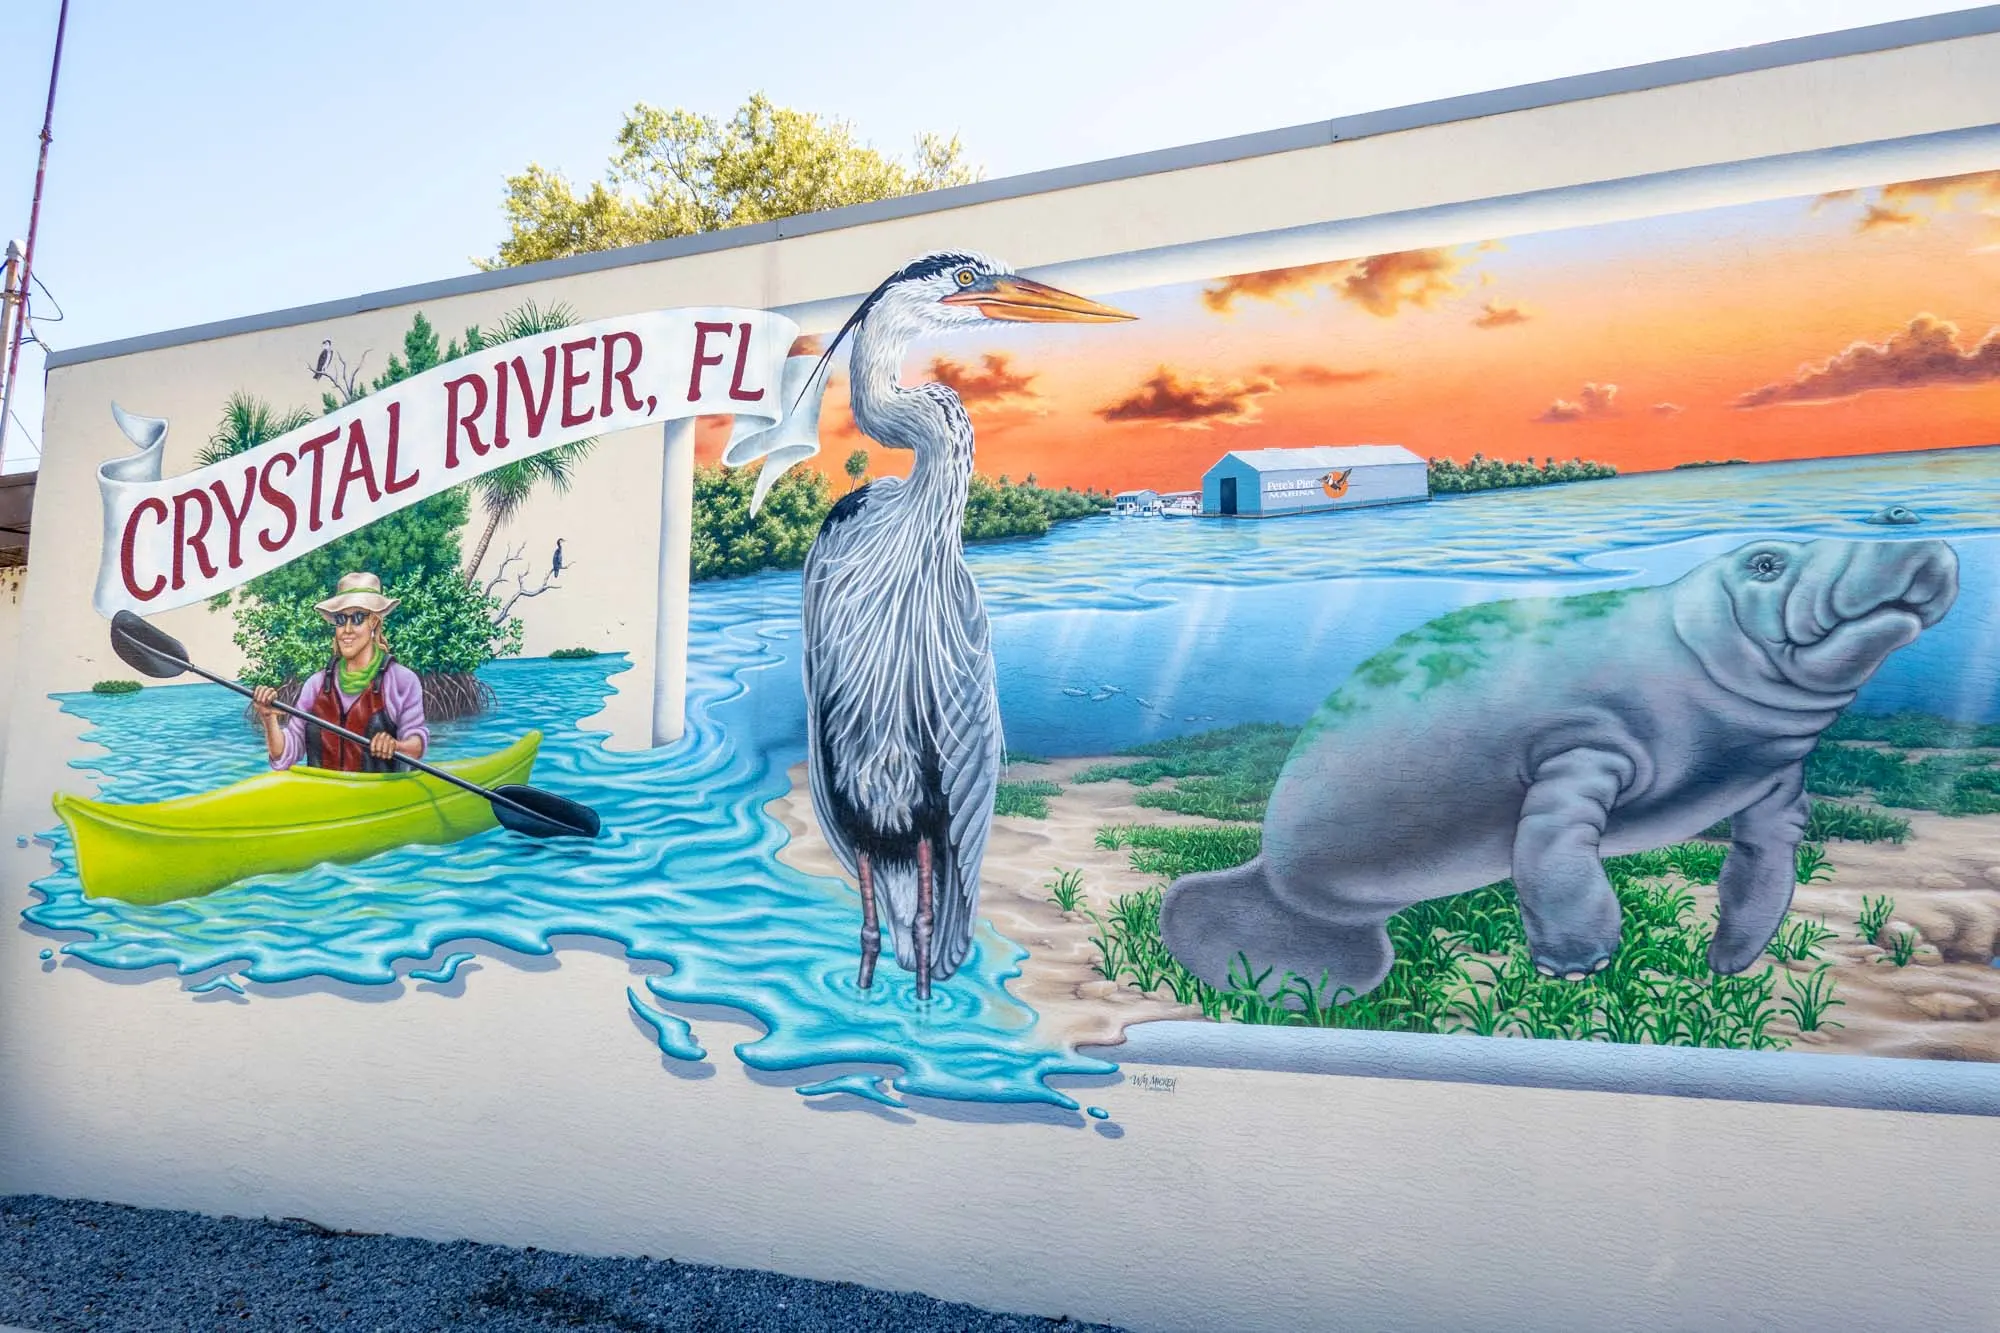 Mural with manatee, bird and sea kayaker that says "Crystal River, FL"